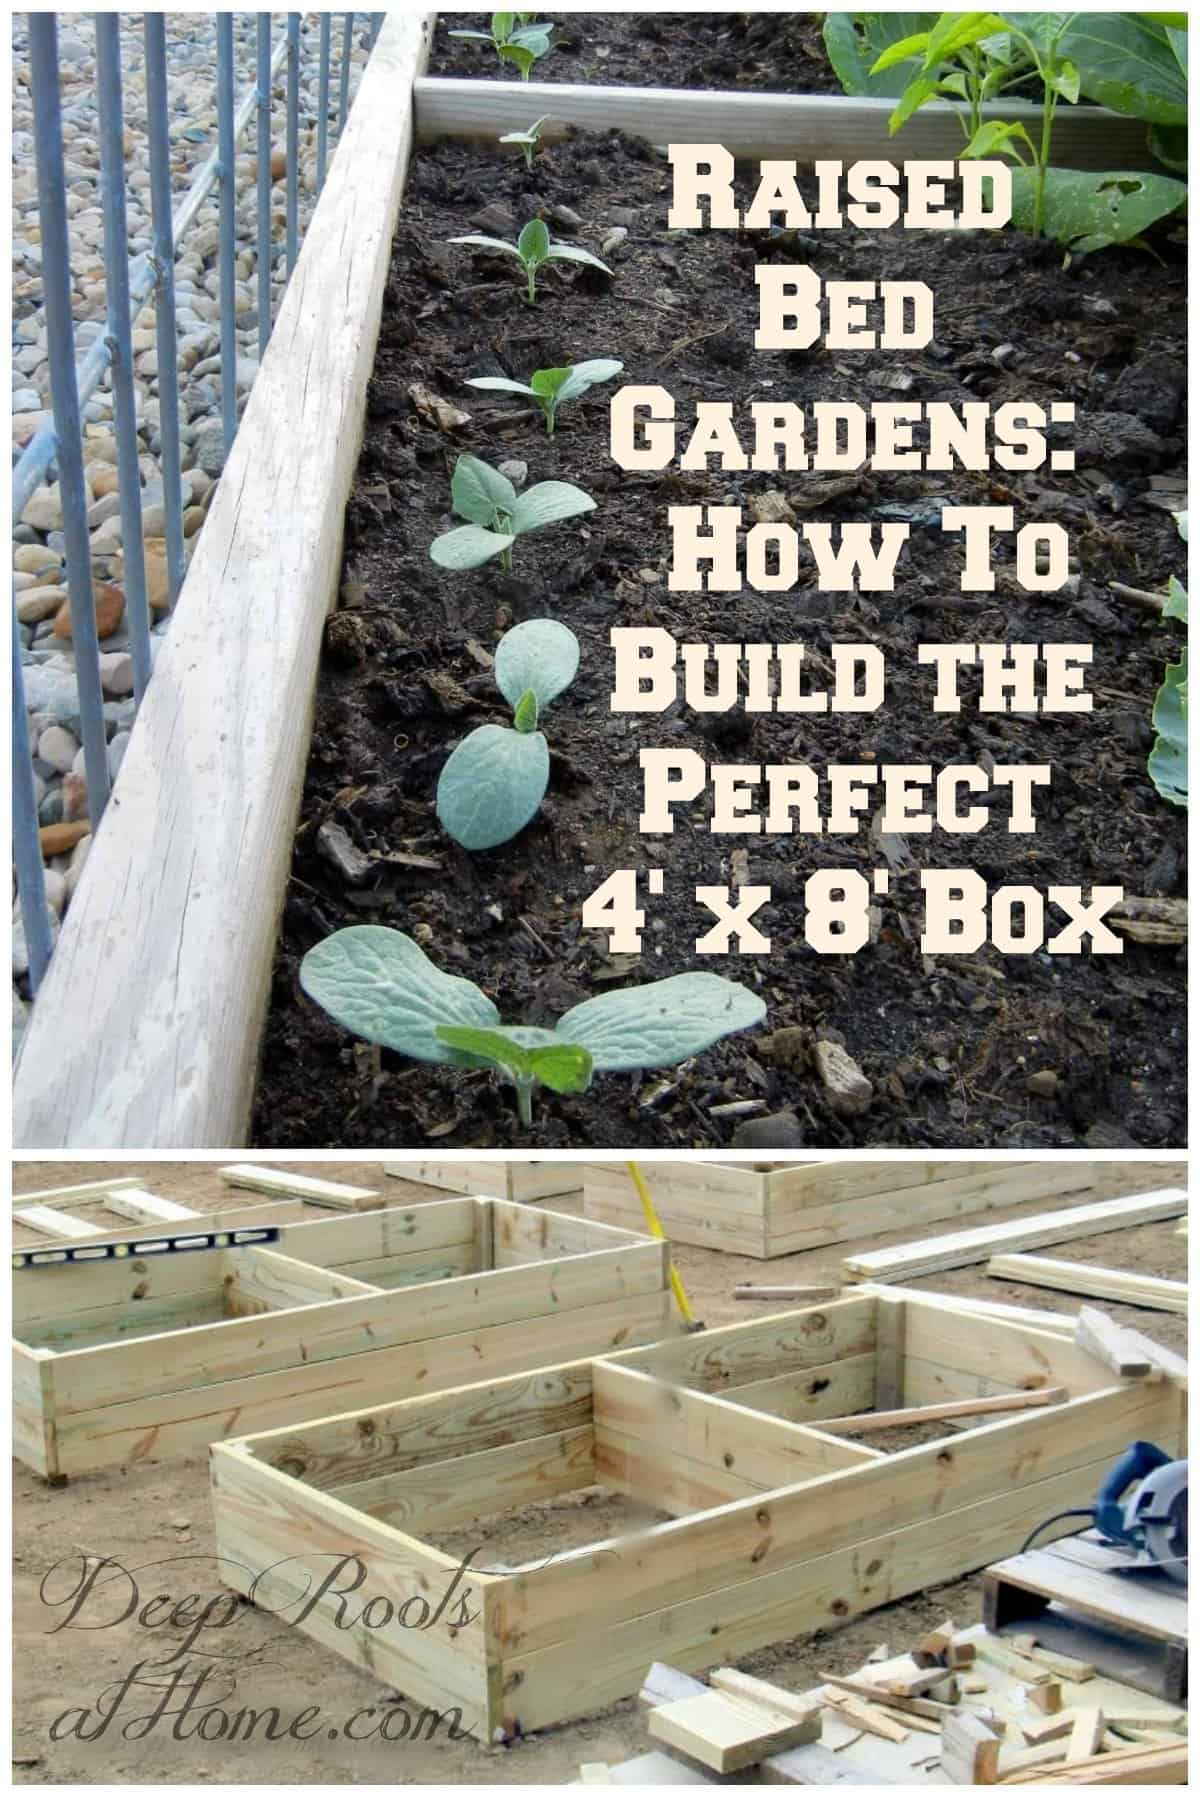 Raised Bed Gardens: How To Build the Perfect 4\' x 8\' Box